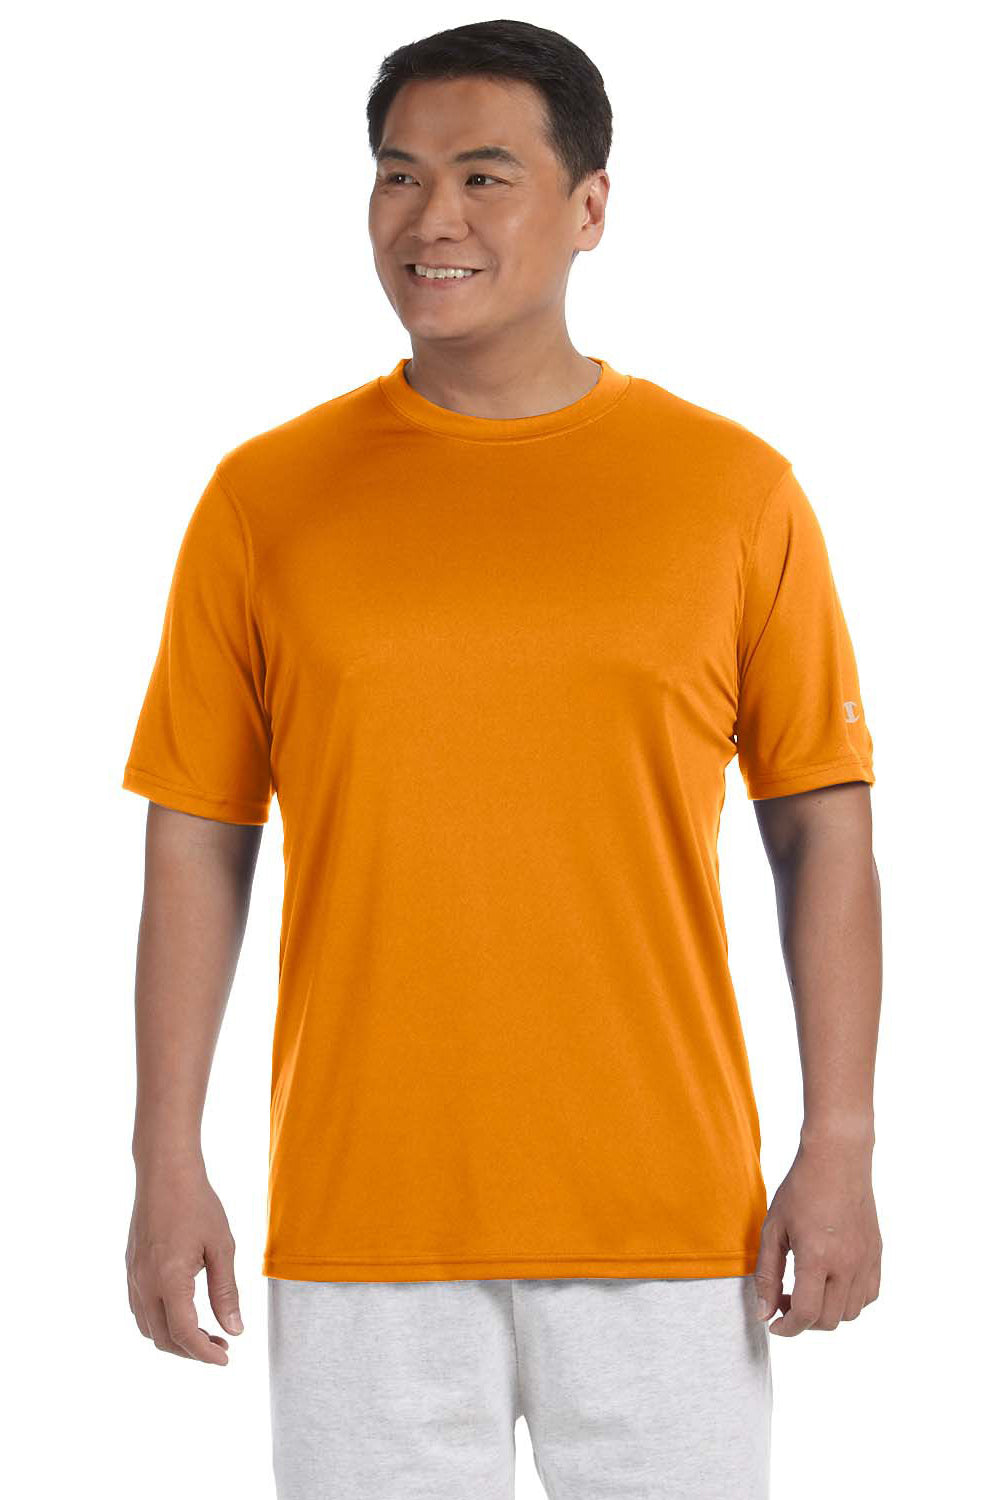 Champion CW22 Mens Double Dry Moisture Wicking Short Sleeve Crewneck T-Shirt Safety Orange Front